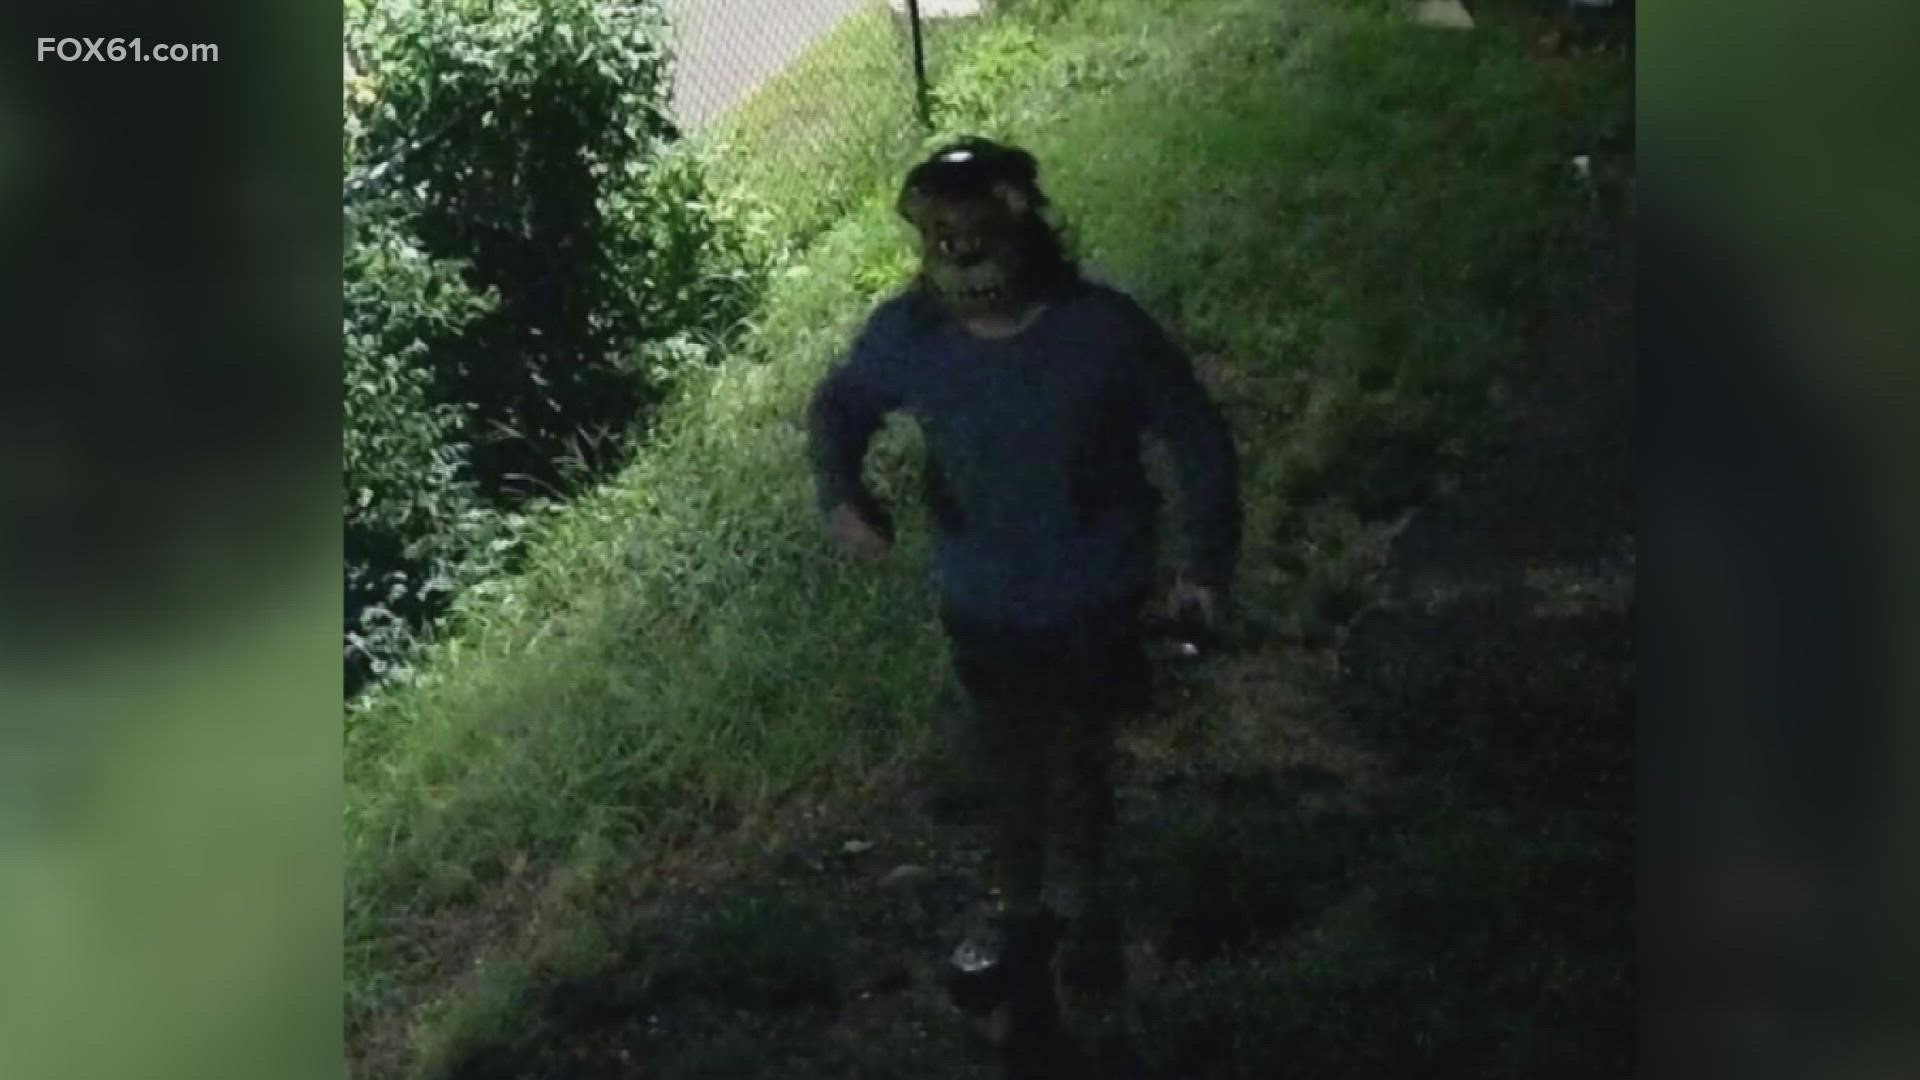 Security camera's captured the suspect entering and leaving the house.